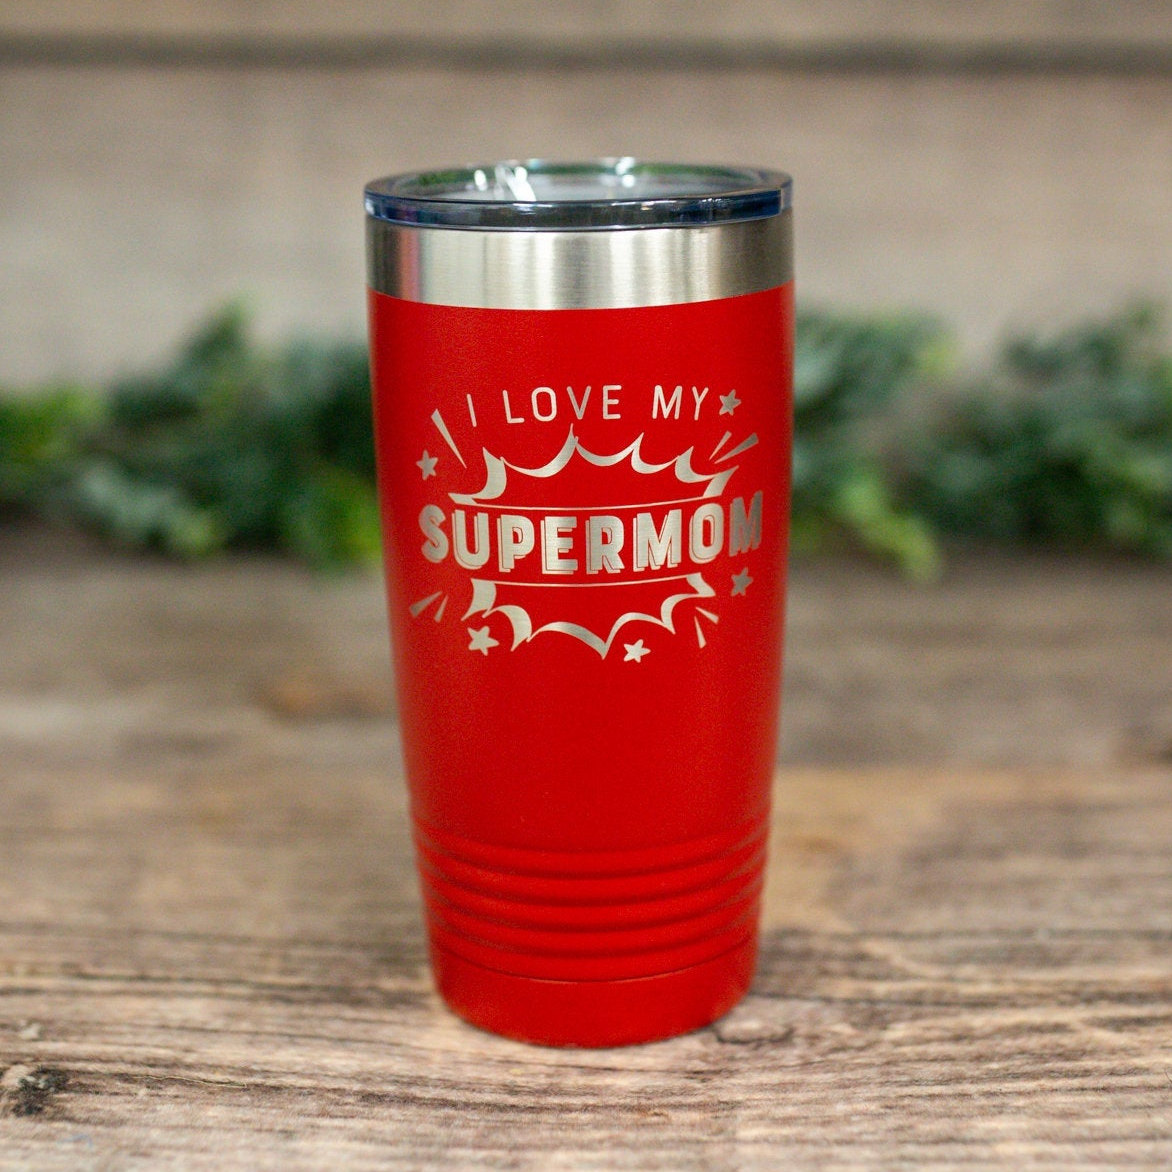 https://3cetching.com/wp-content/uploads/2021/07/i-love-my-supermom-engraved-personalized-mom-tumbler-mothers-day-gift-mom-birthday-gift-60f73531.jpg